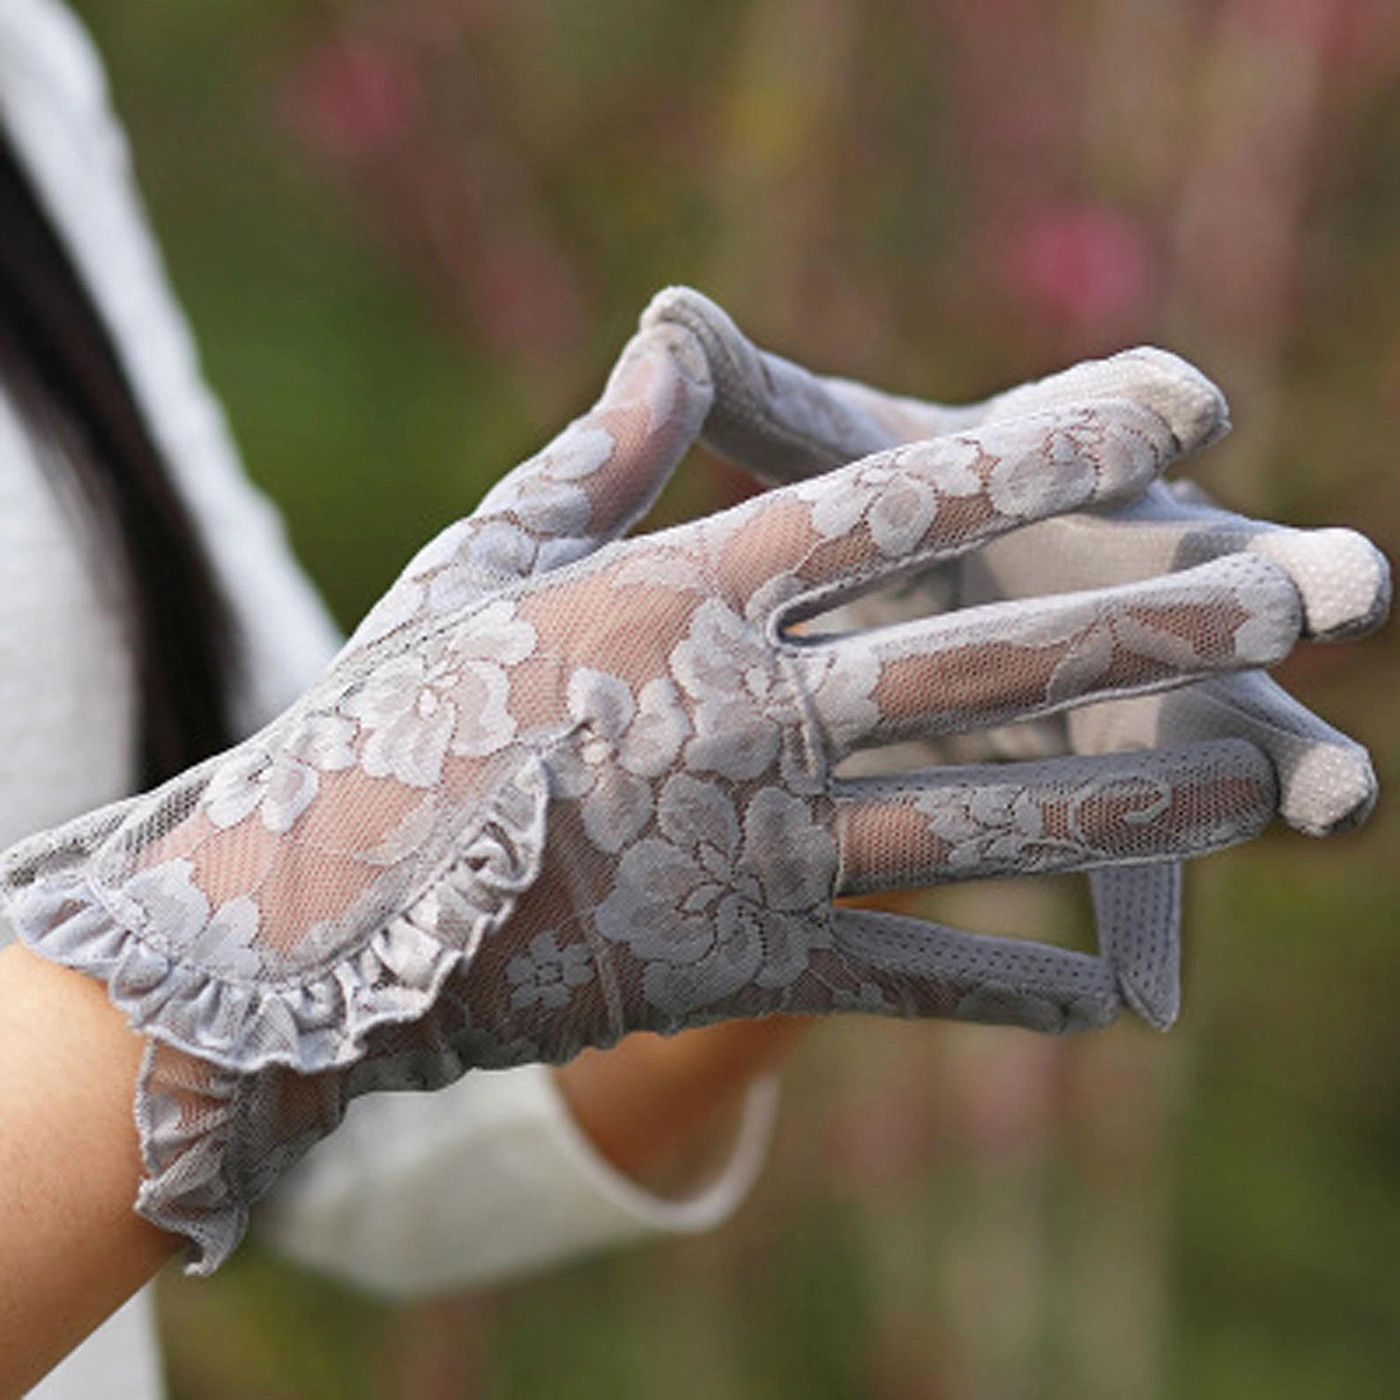 Short luxury Lace Gloves inspired by Bridgerton  - Product image